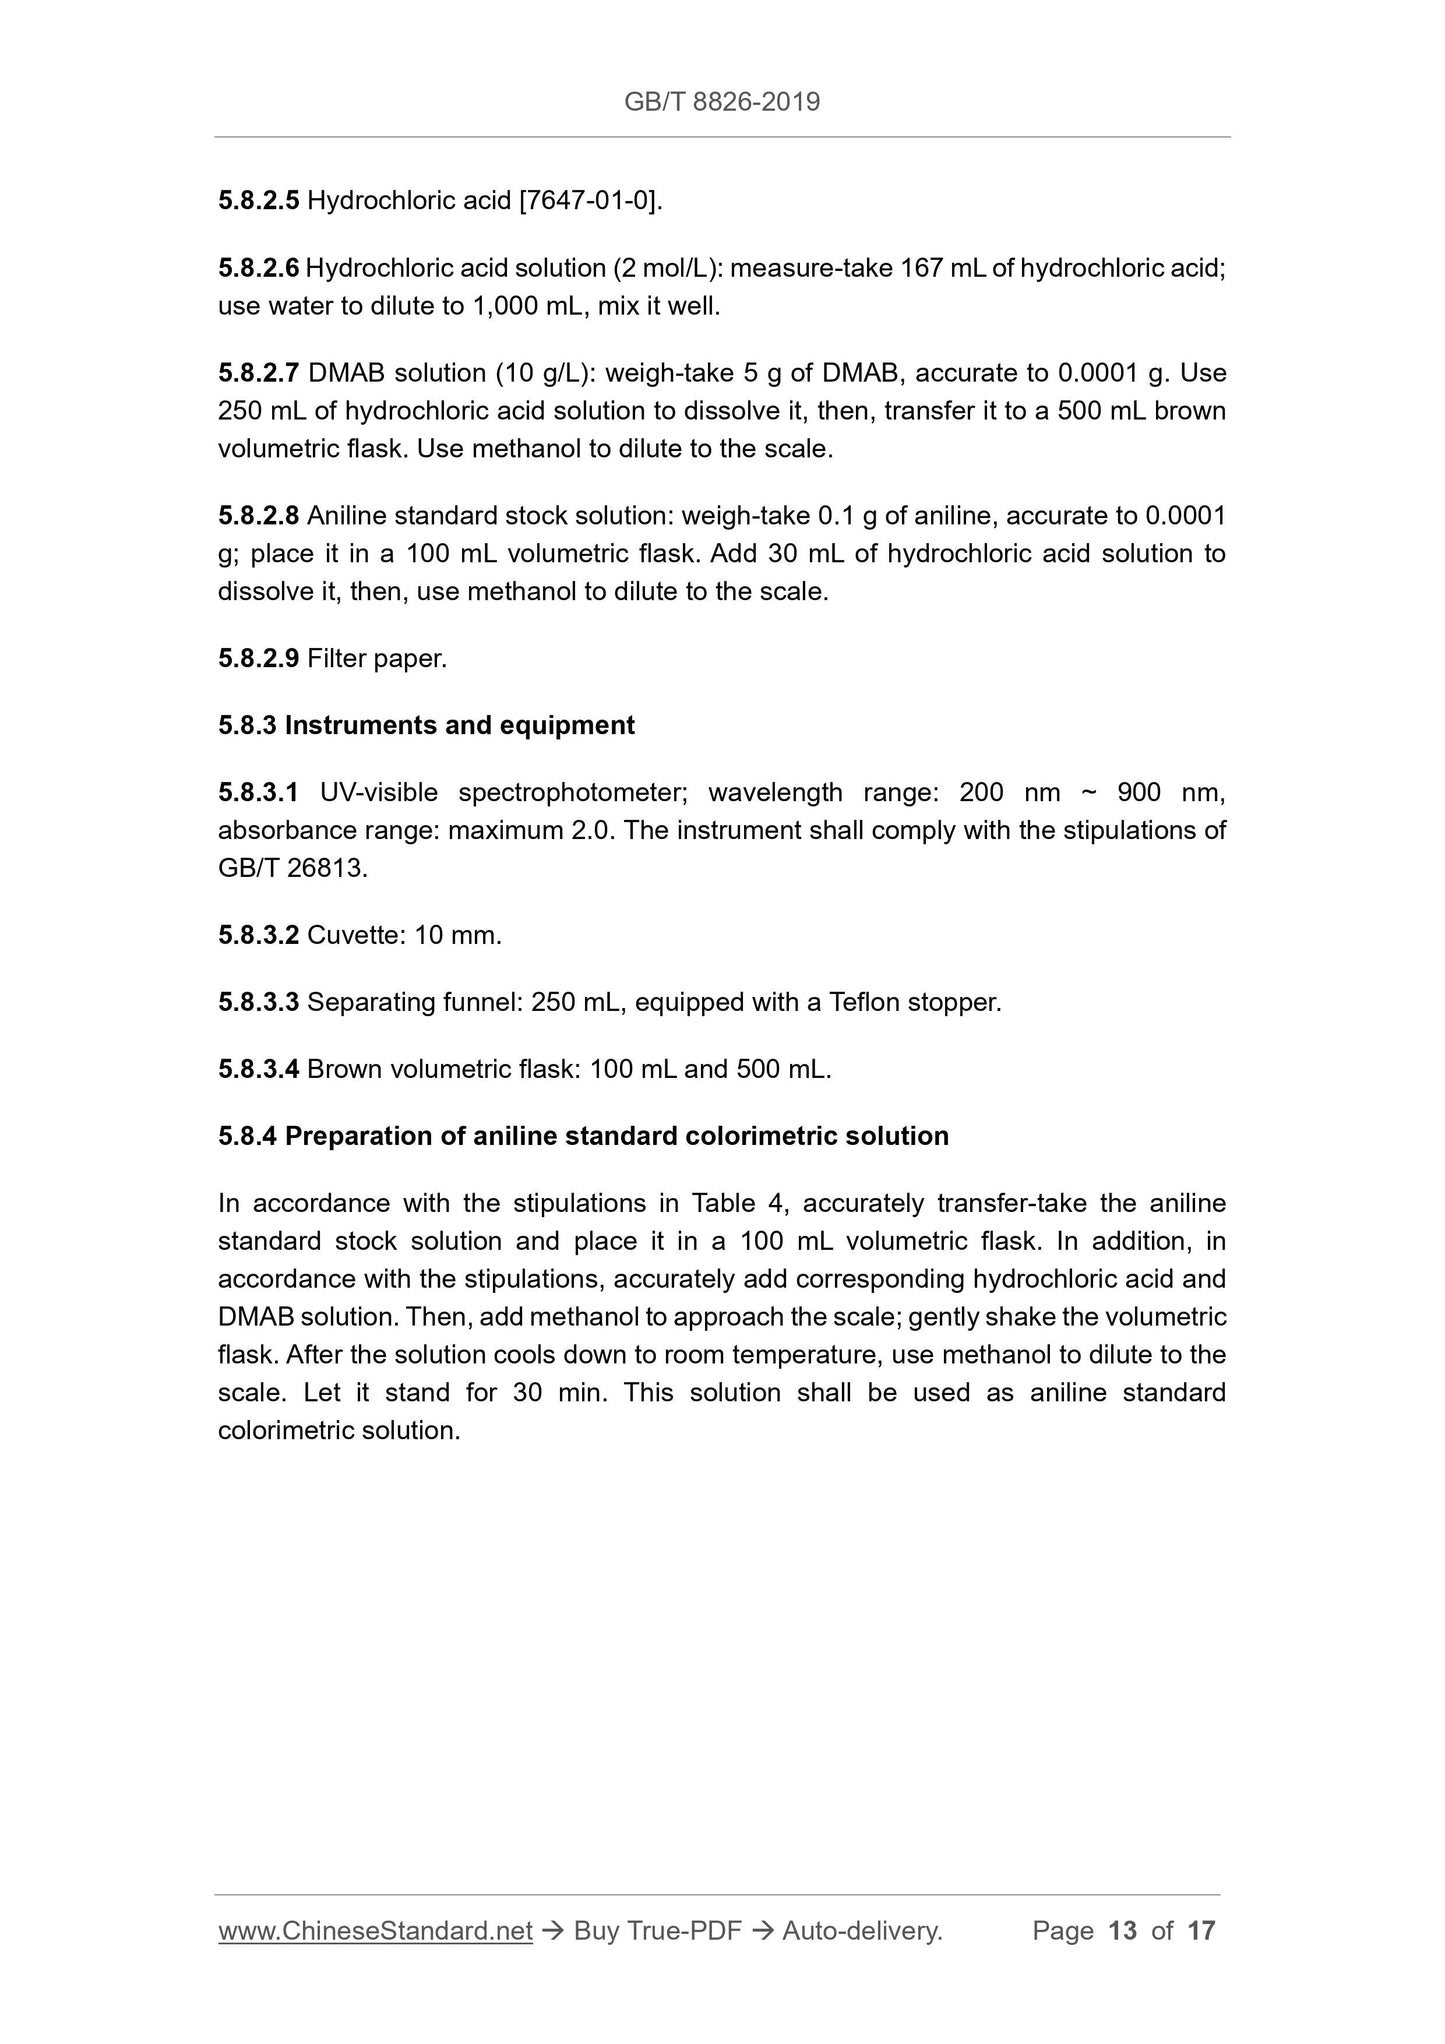 GB/T 8826-2019 Page 7